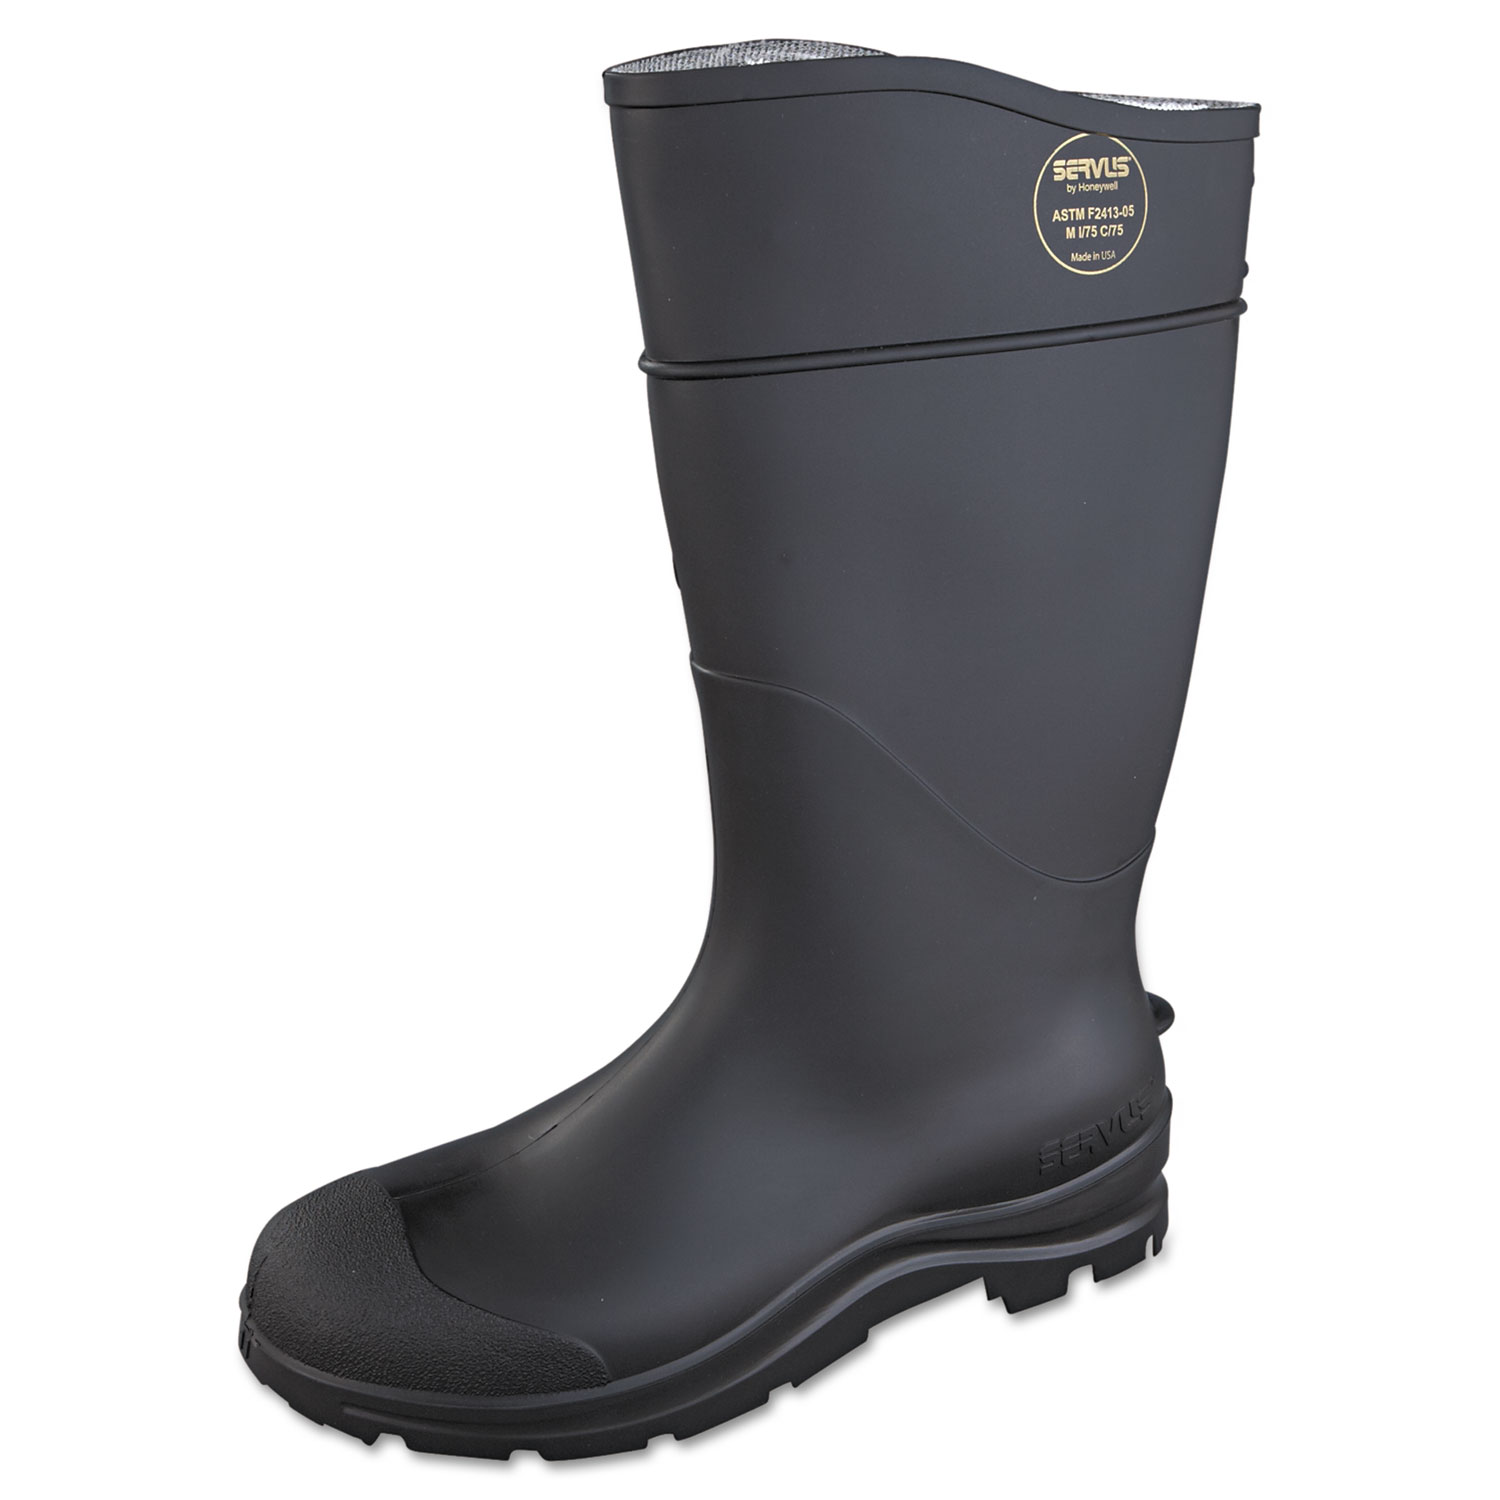  SERVUS by Honeywell 18821-BLM-110 CT Safety Knee Boot with Steel Toe, Black, Pair (SVS1882111) 